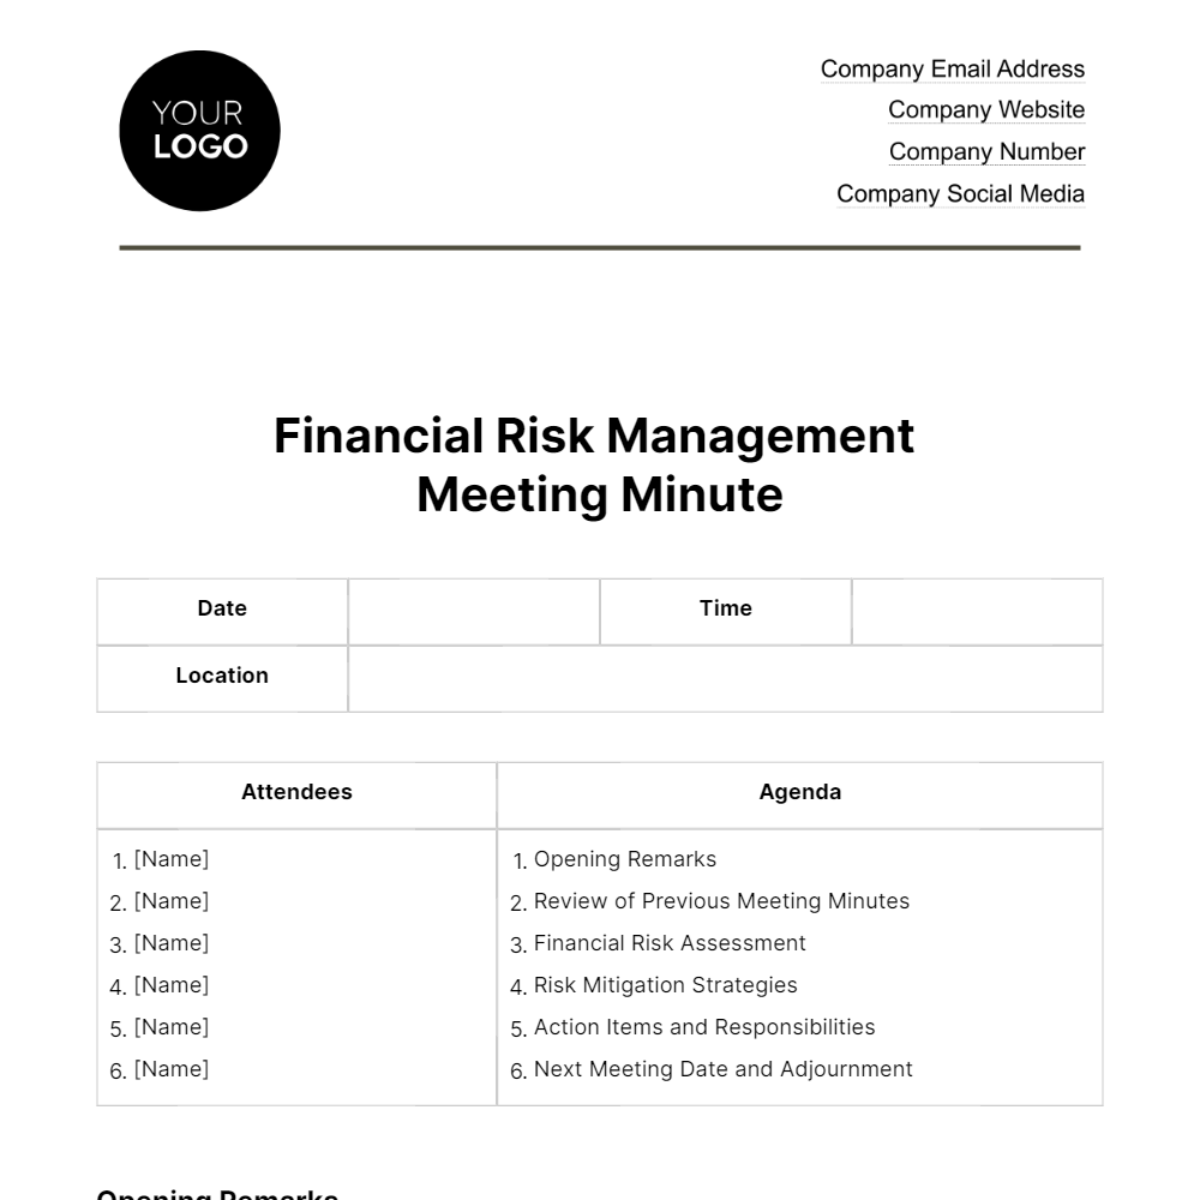 Financial Risk Management Meeting Minute Template